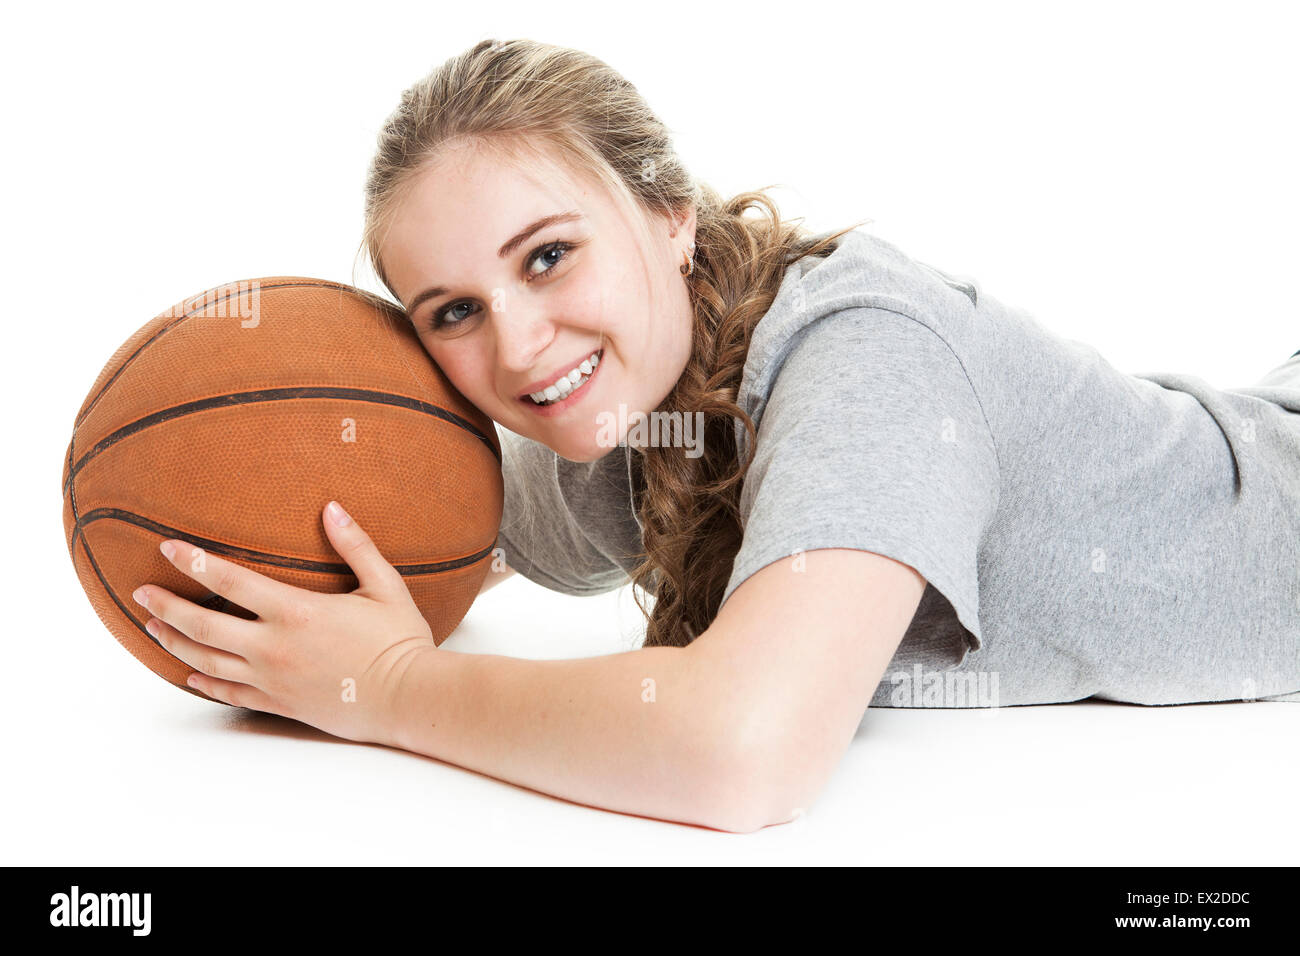 Portrait of a teen with basket ball Stock Photo